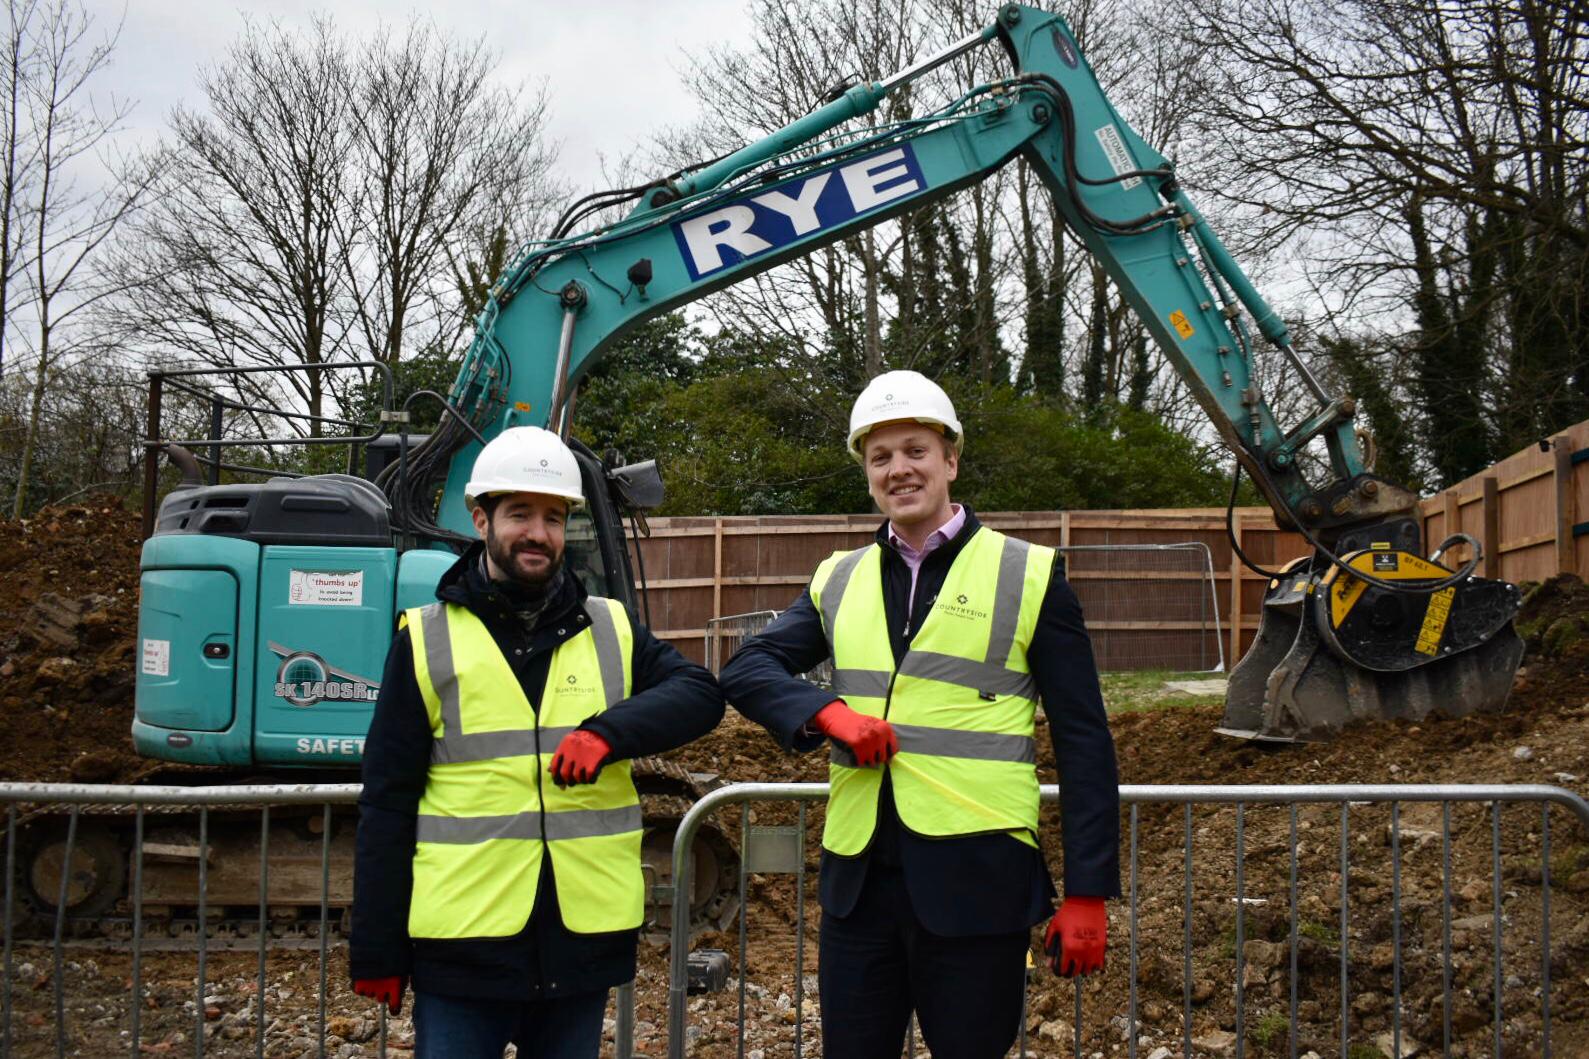 Cllr Andreas Kirsch, Leader of Kingston Council, and Dan King, Managing Director of Countryside (West London)